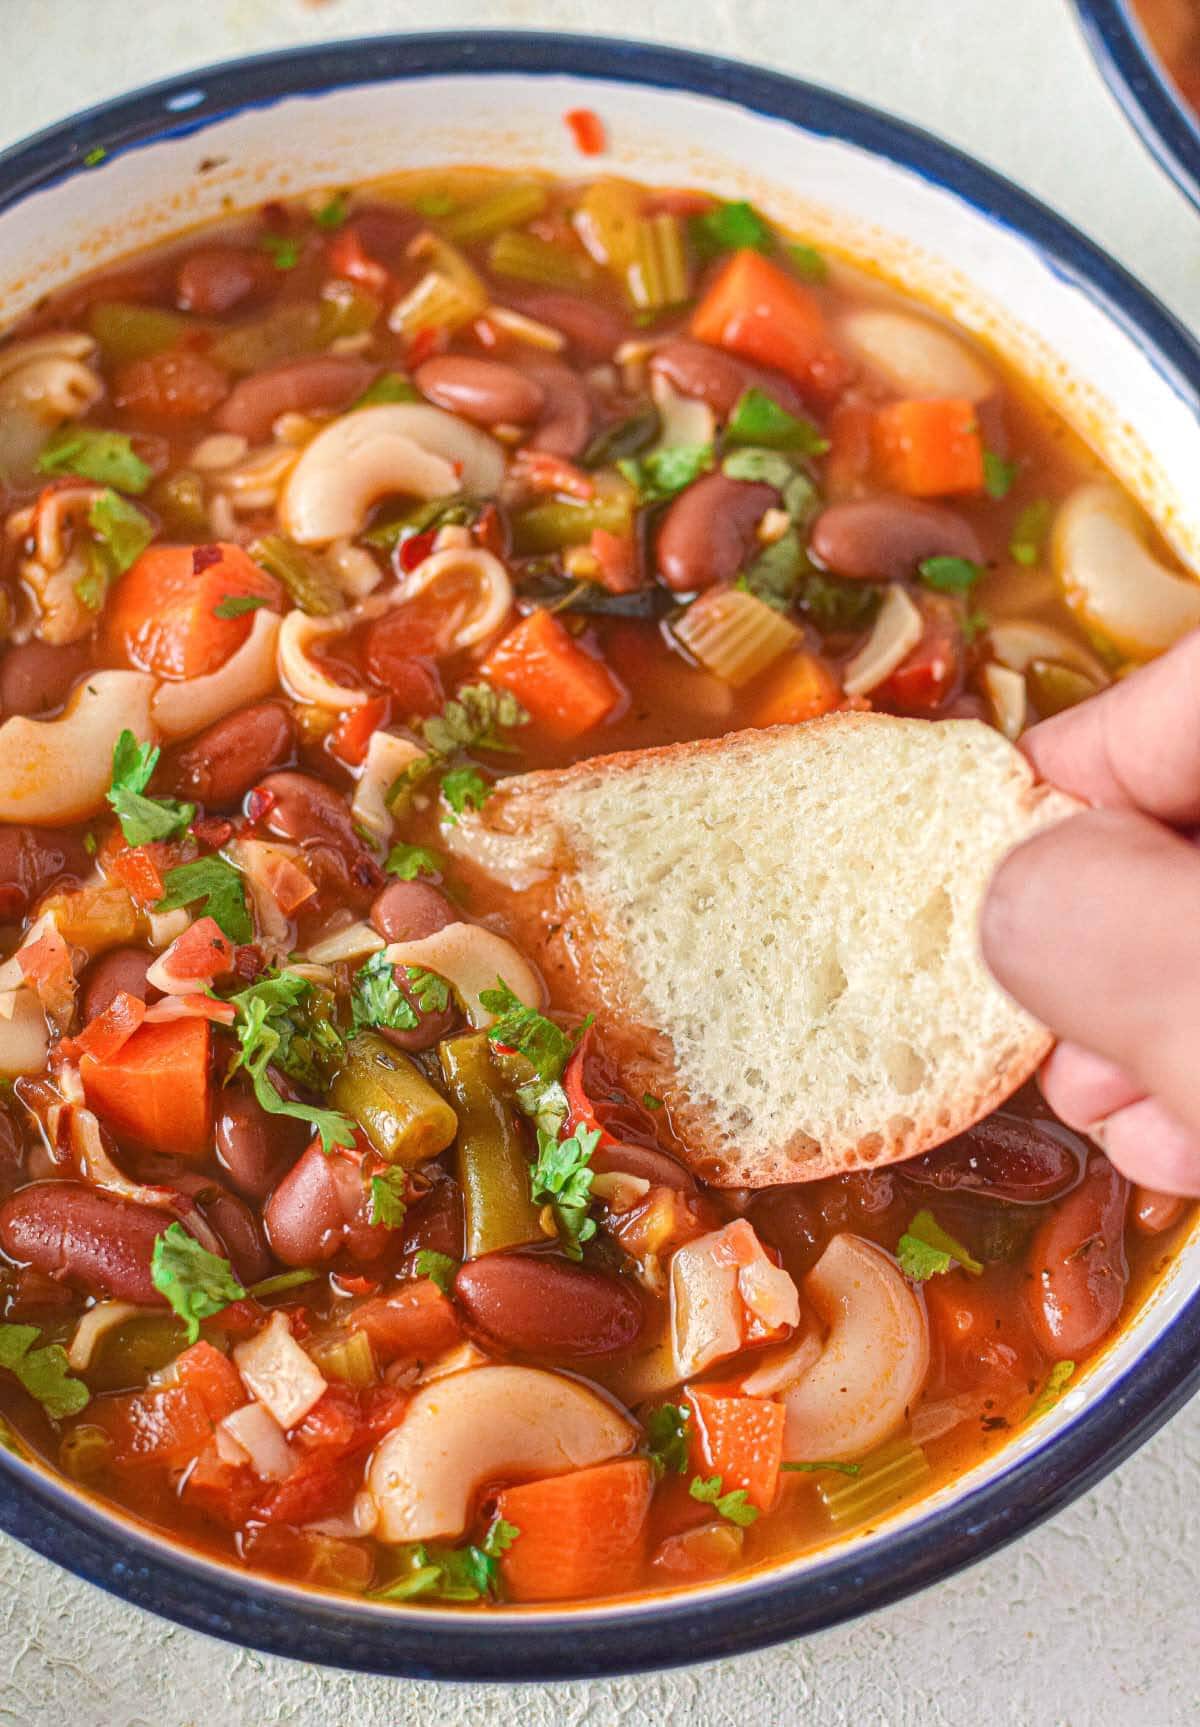 Easy Minestrone Soup in bowl with bread